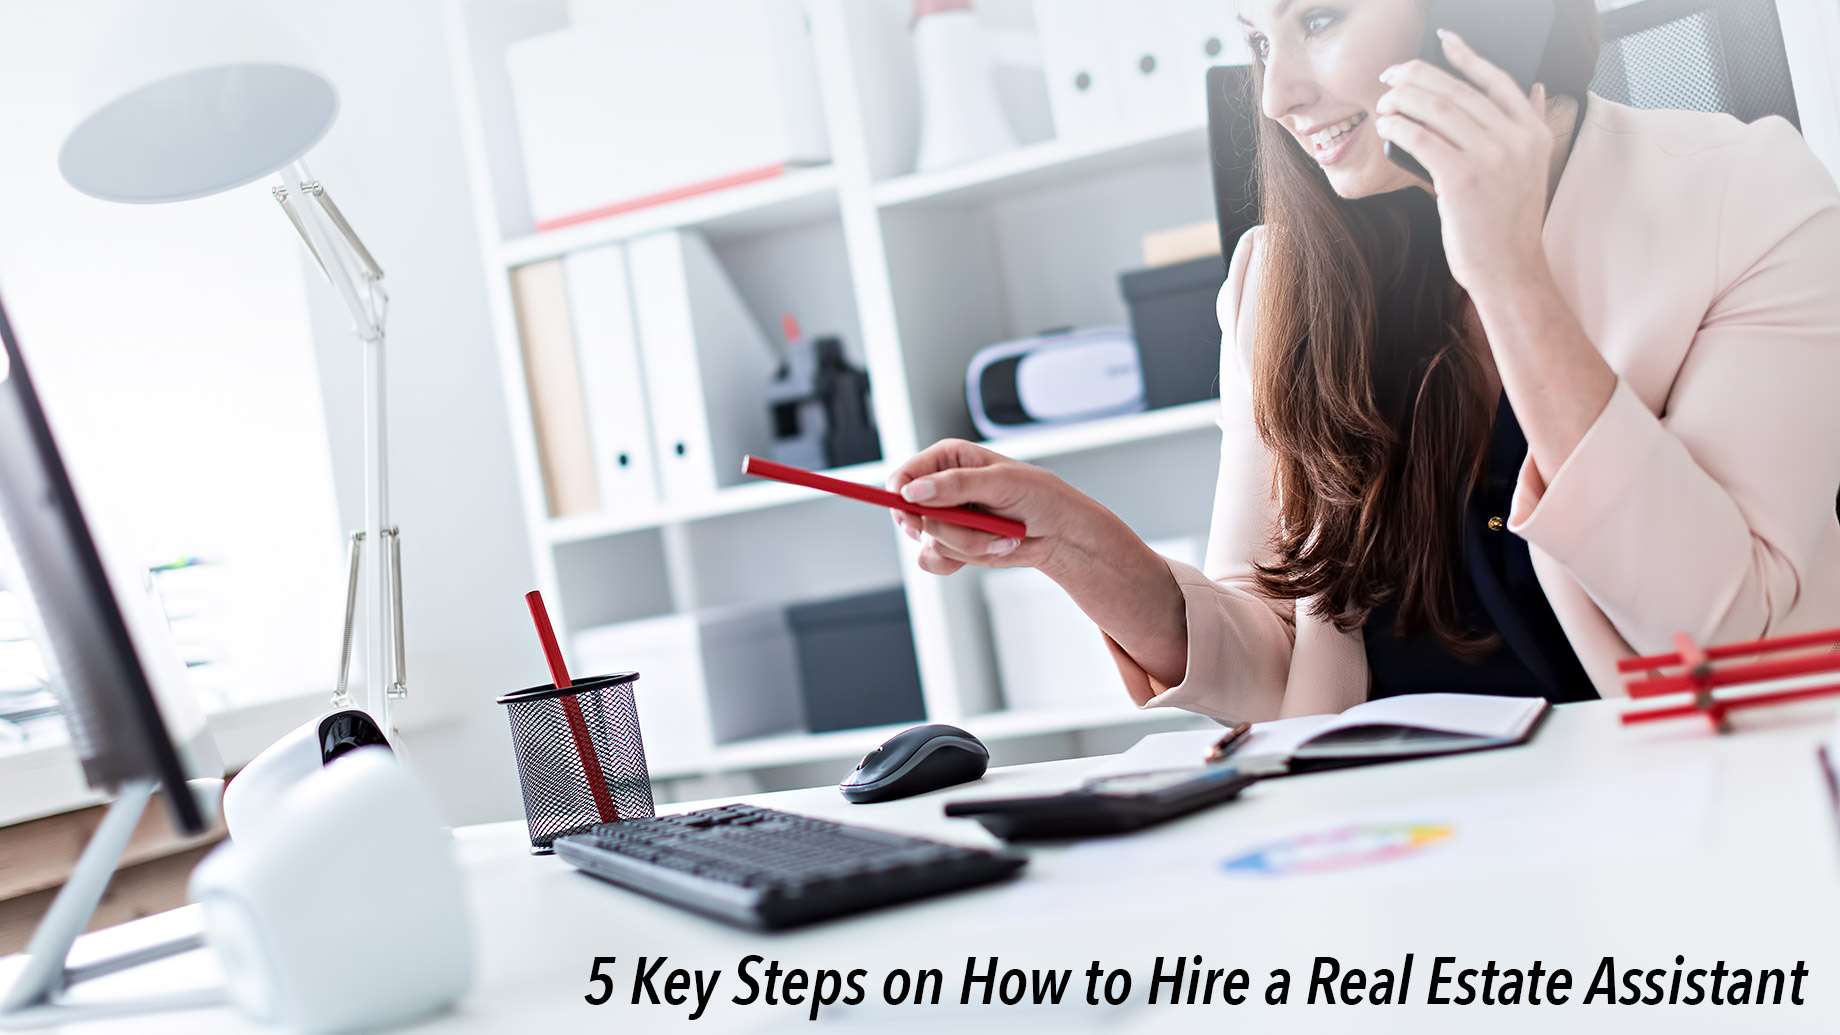 5 Key Steps on How to Hire a Real Estate Assistant